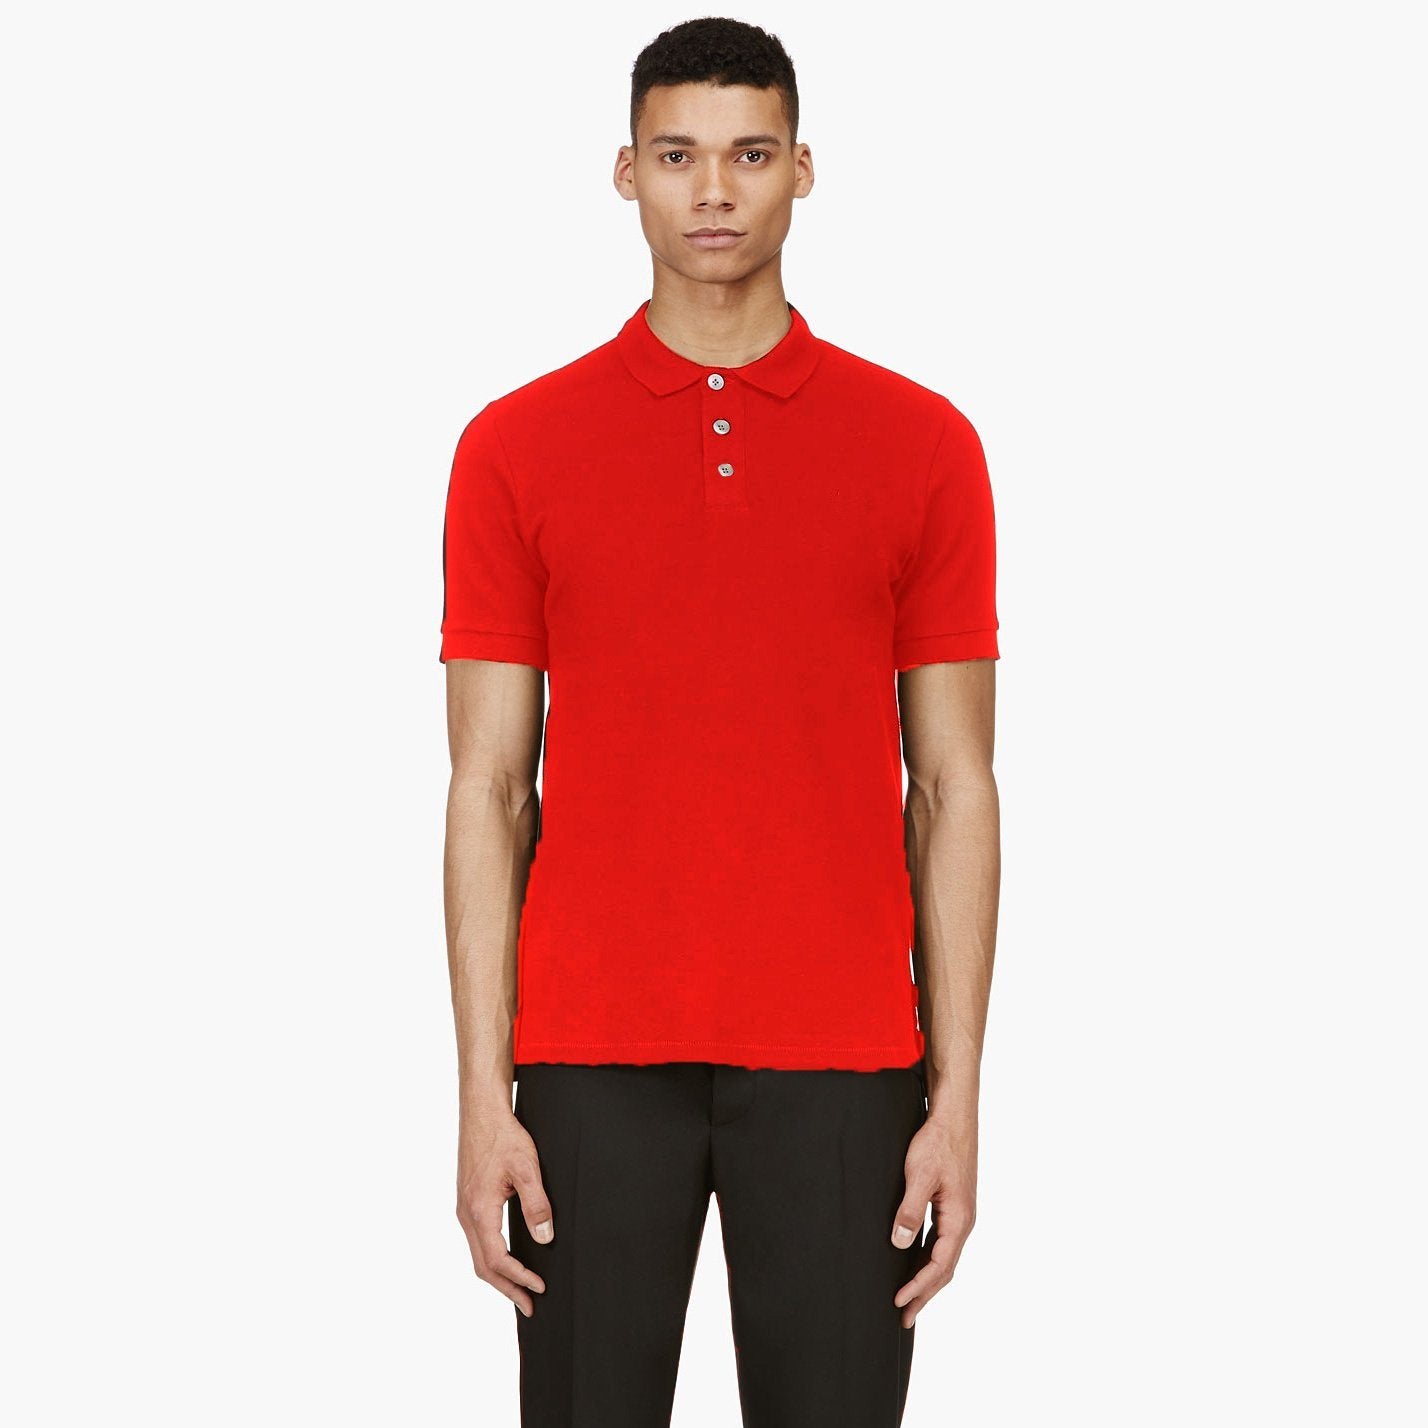 PTW Trend Short Sleeve Minor Fault Polo Shirt Minor Fault Image Red M 